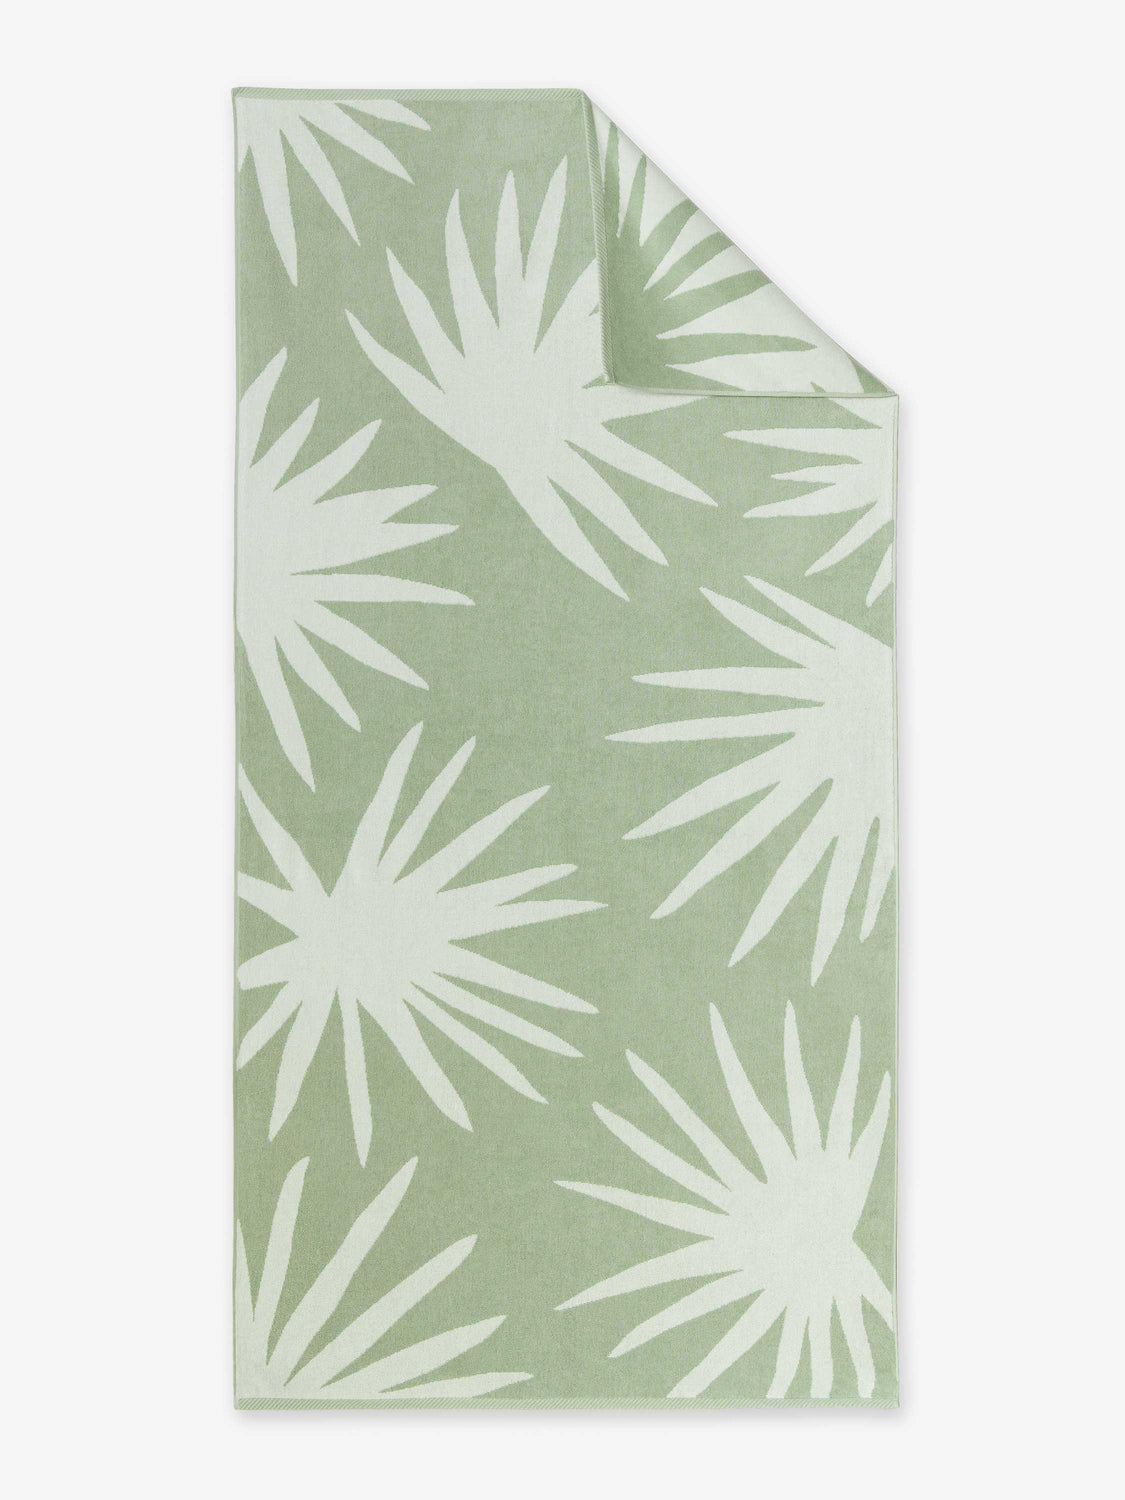 An oversized, green and white palm tree patterned cabana beach towel laid out.